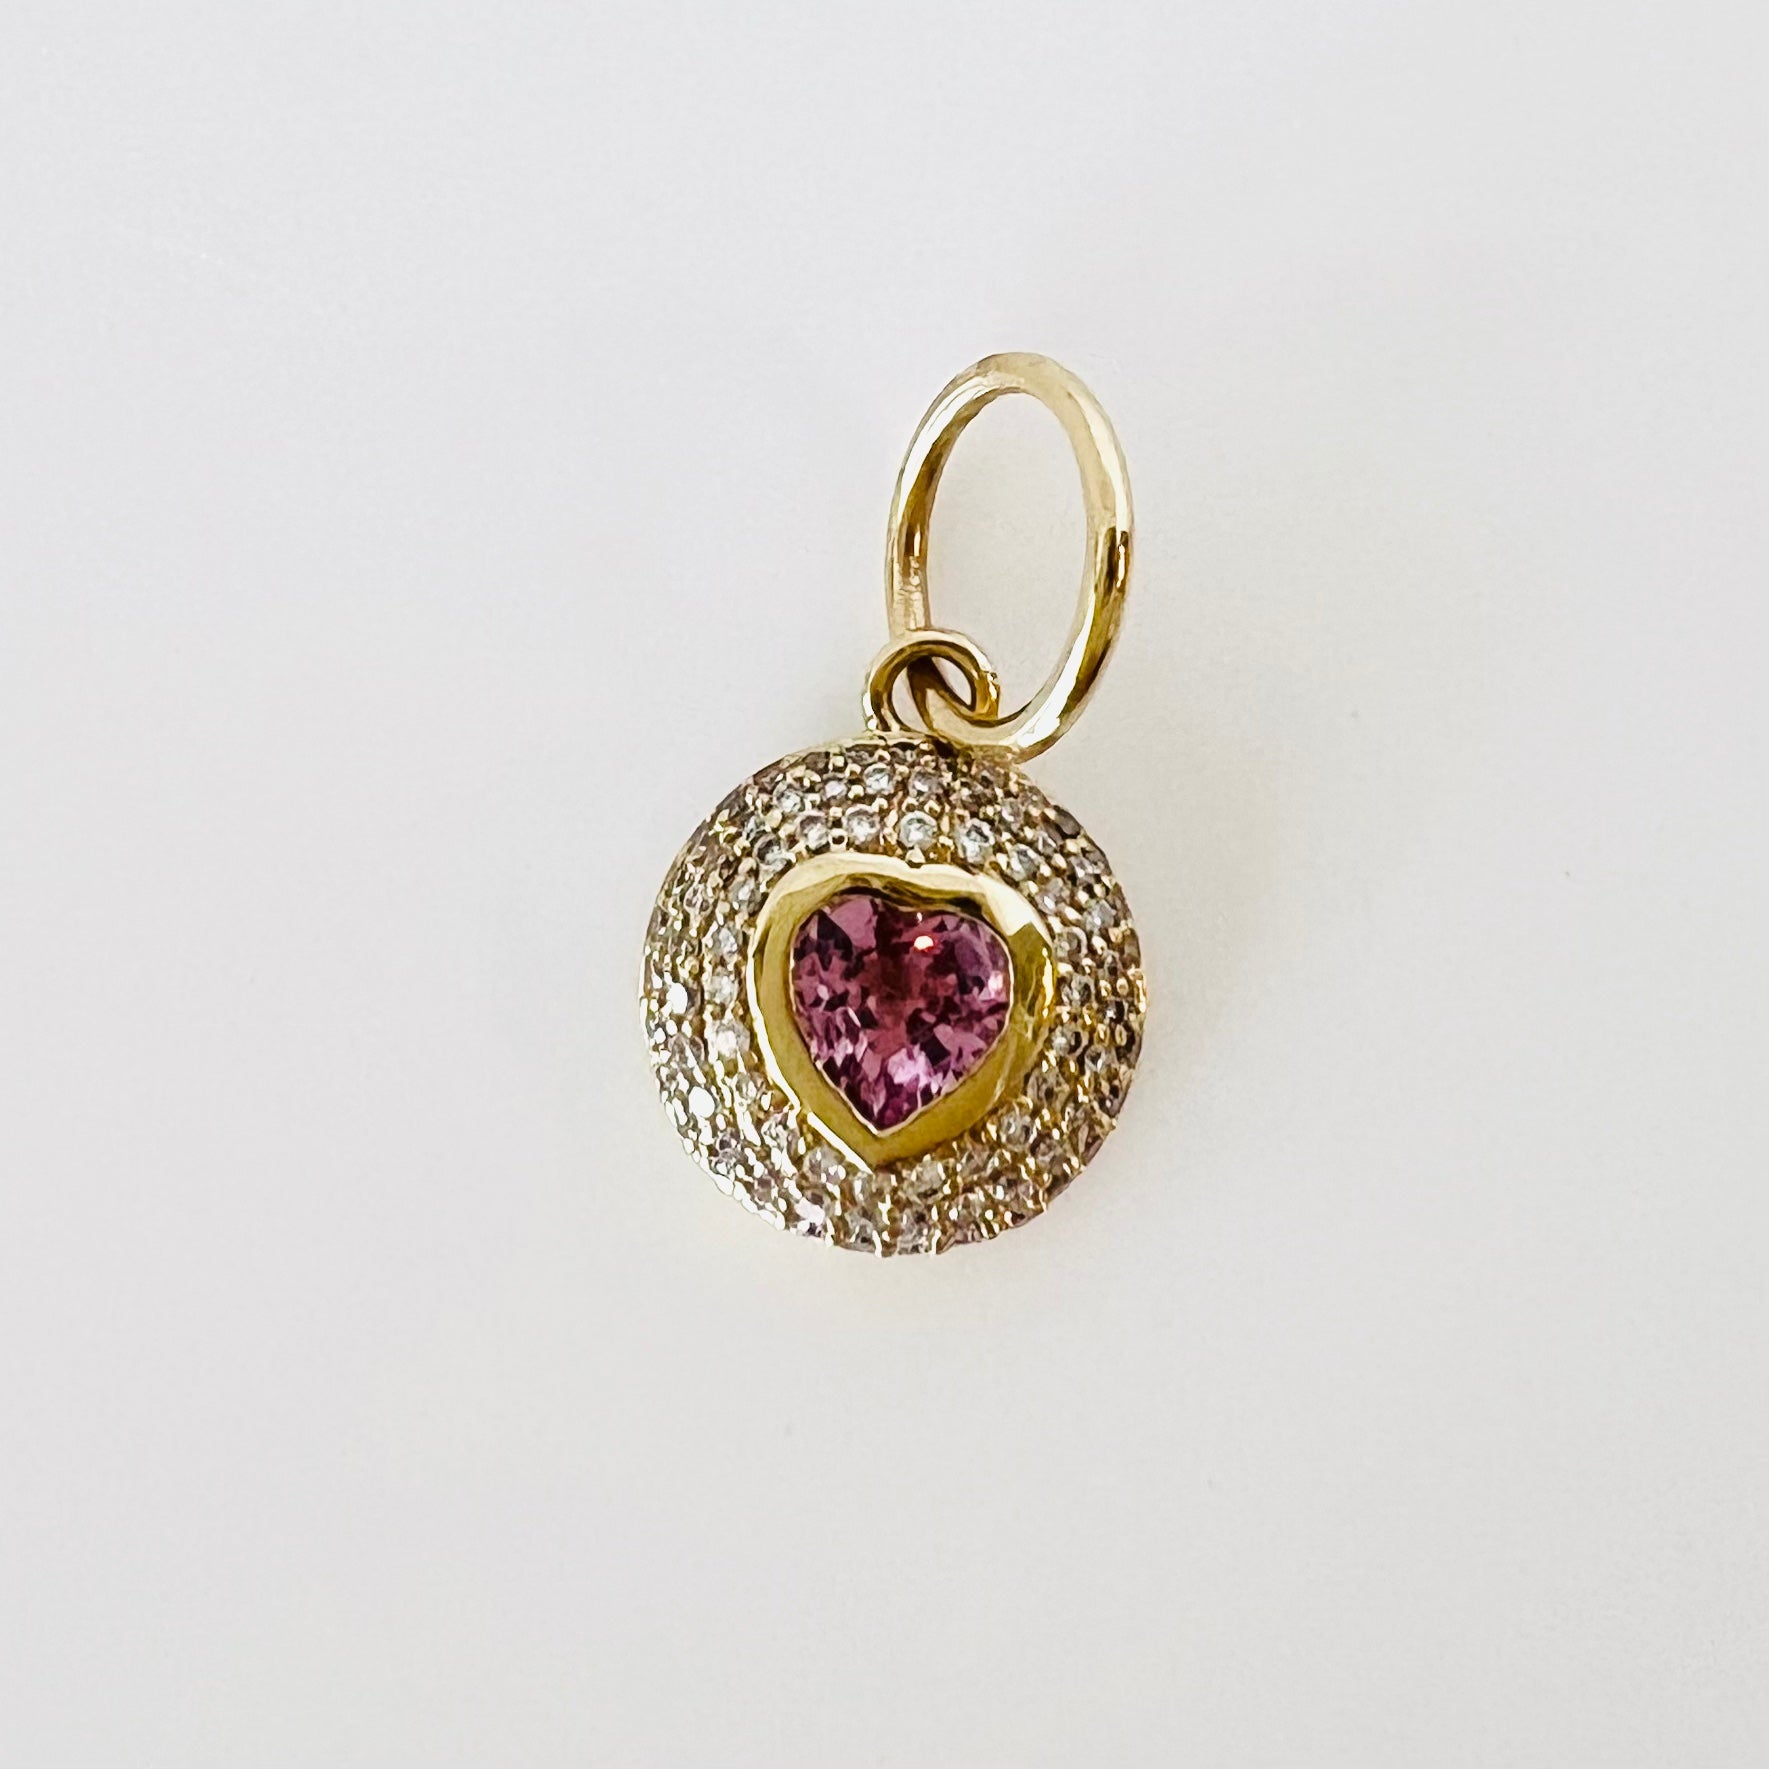 14k gold and diamond pendant/charm with pink sapphire heart